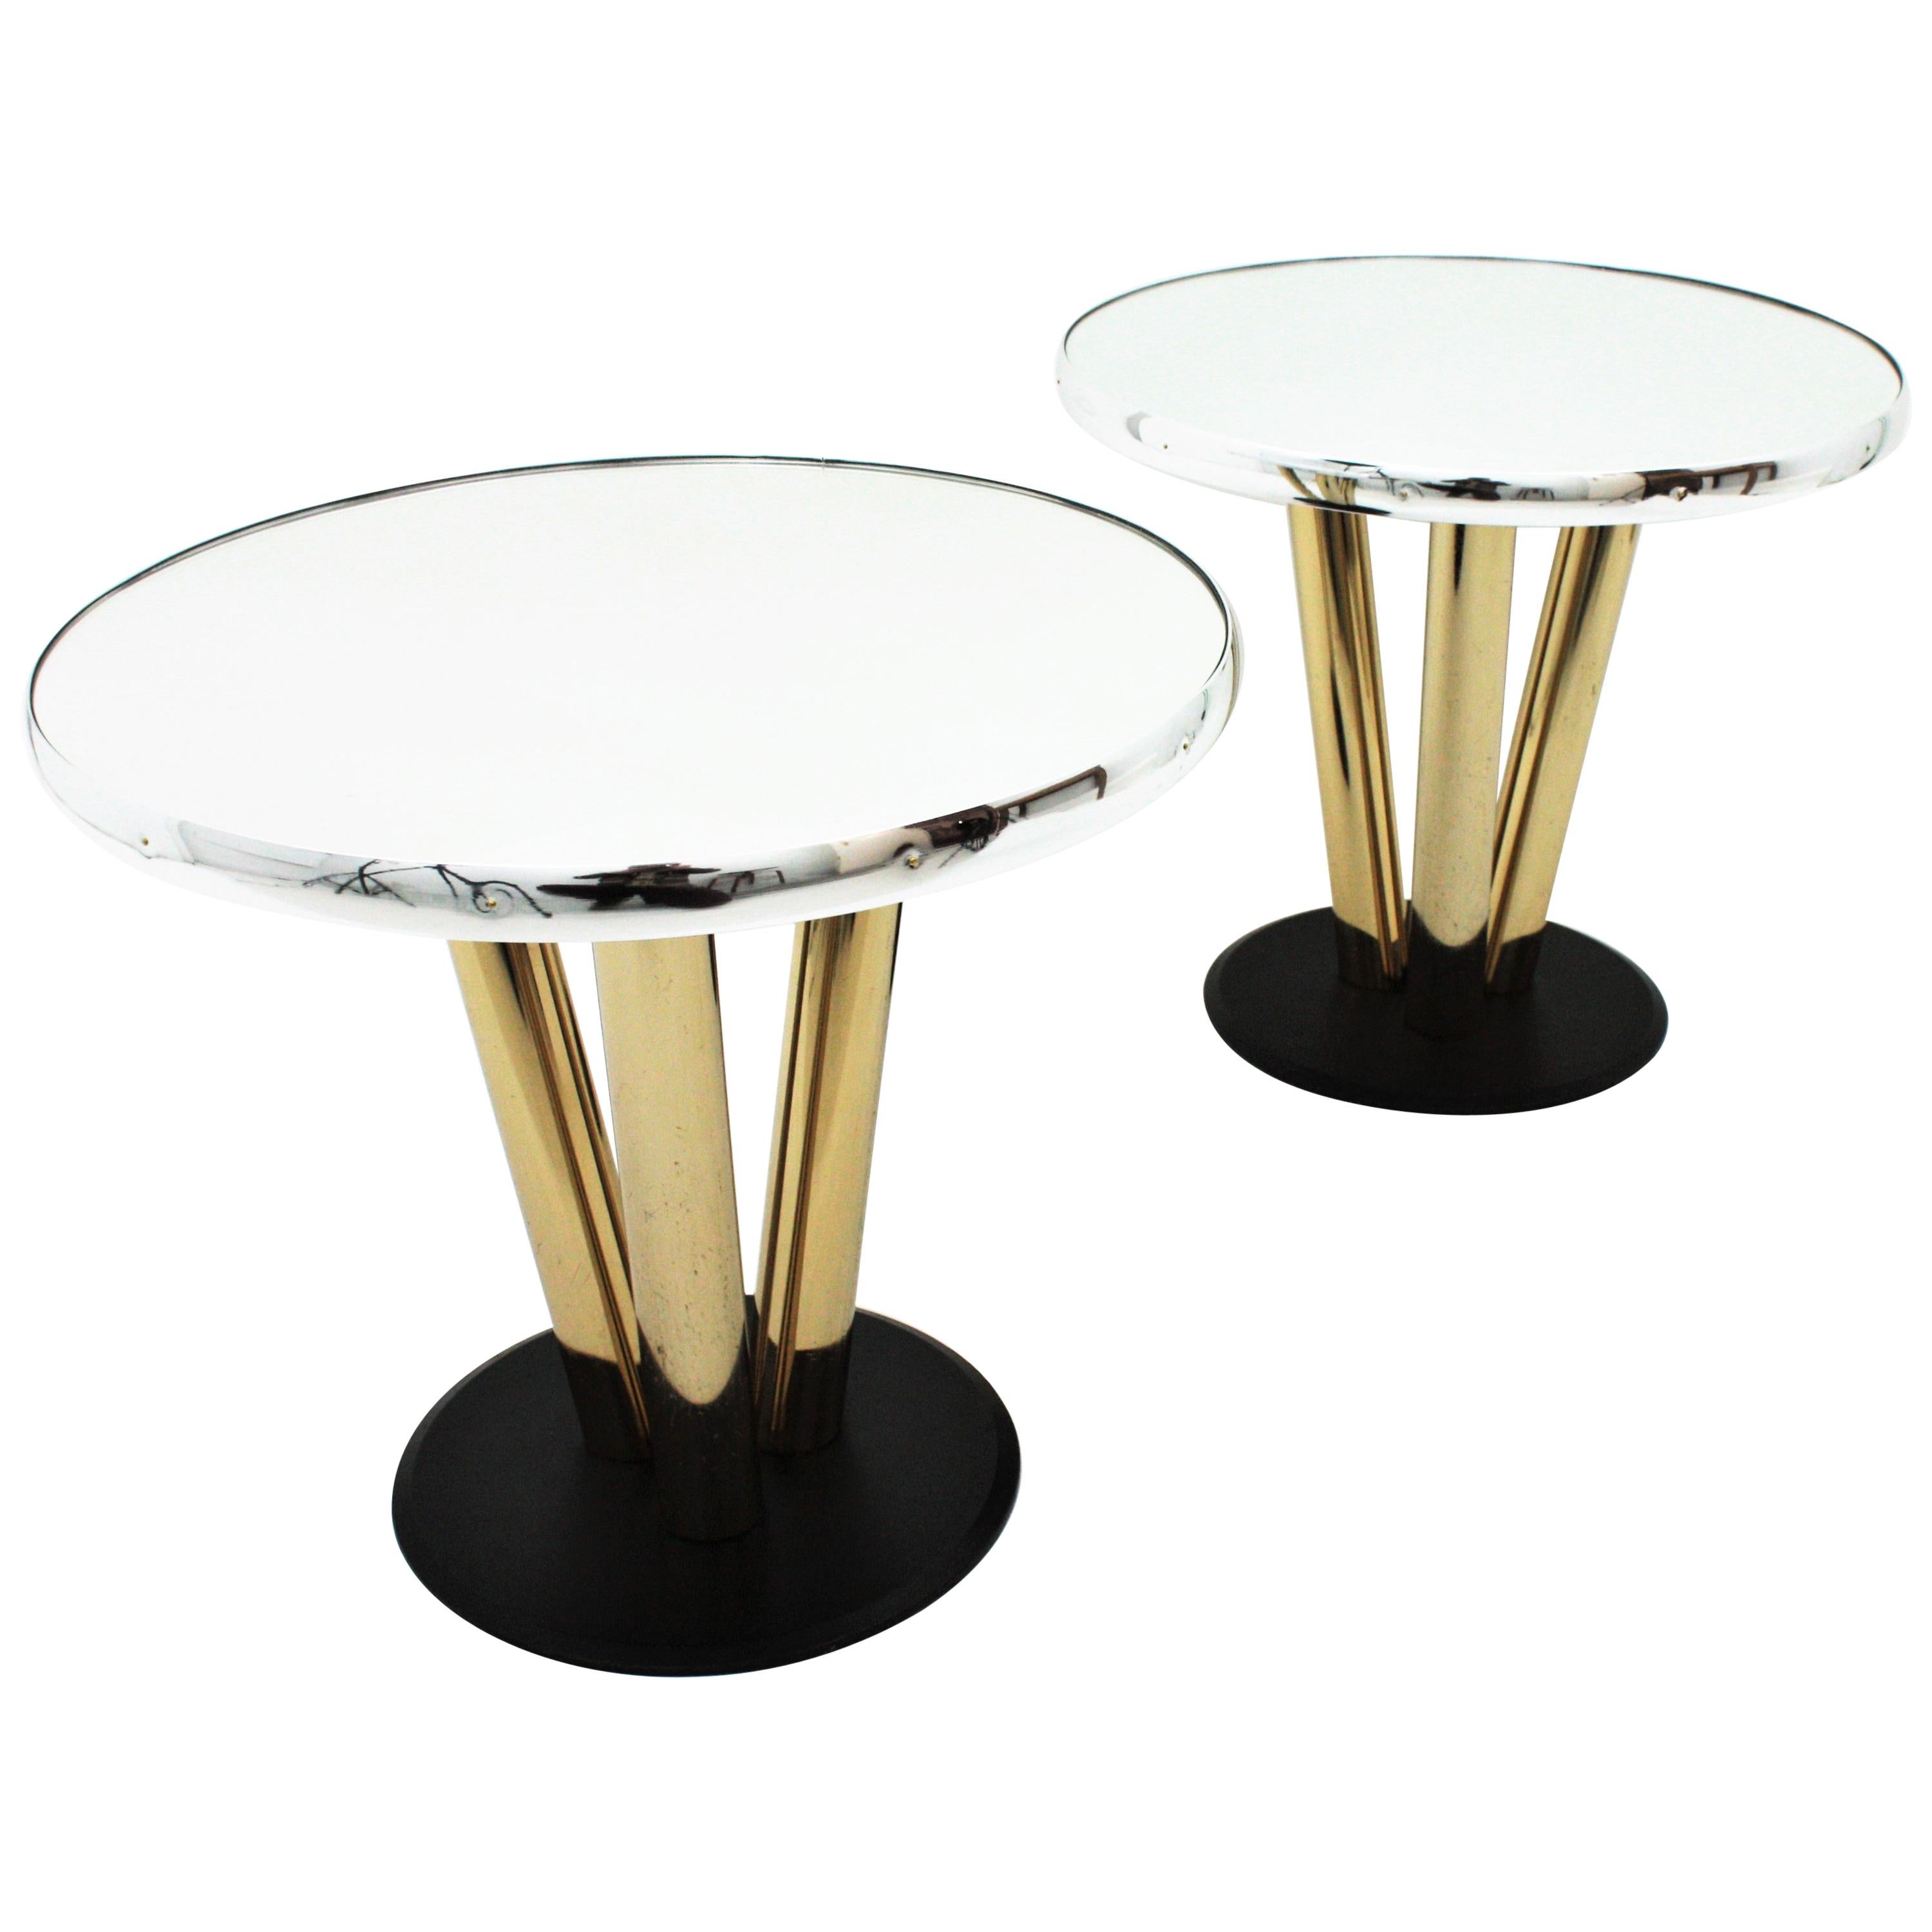 Pair of Round Side Tables in Brass, Mirror and Black Lacquer For Sale 7